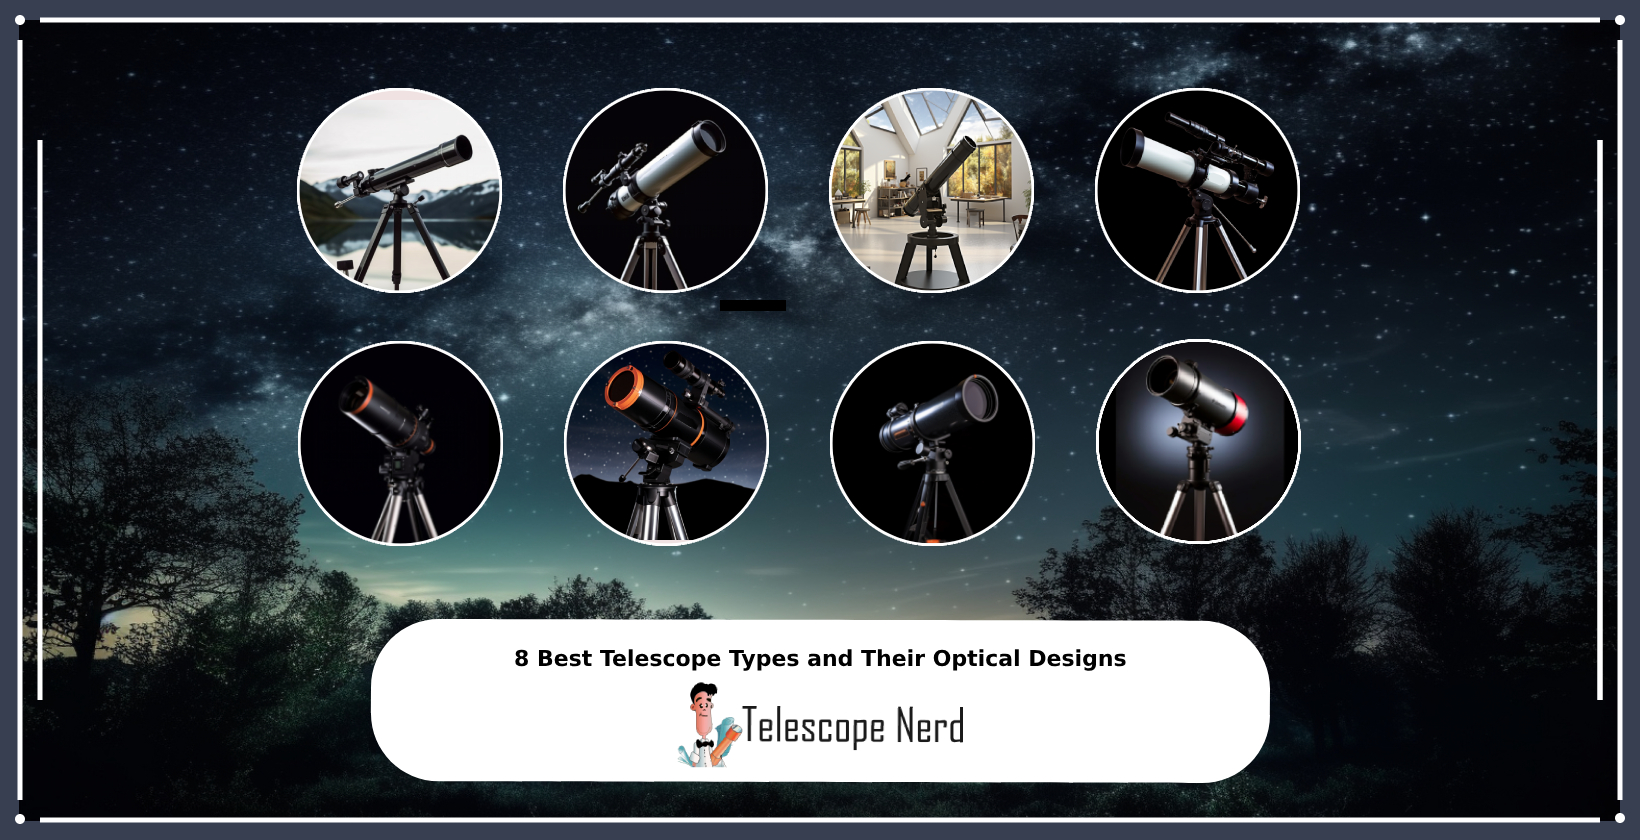 8 Different Telescope Types and Their Optical Designs